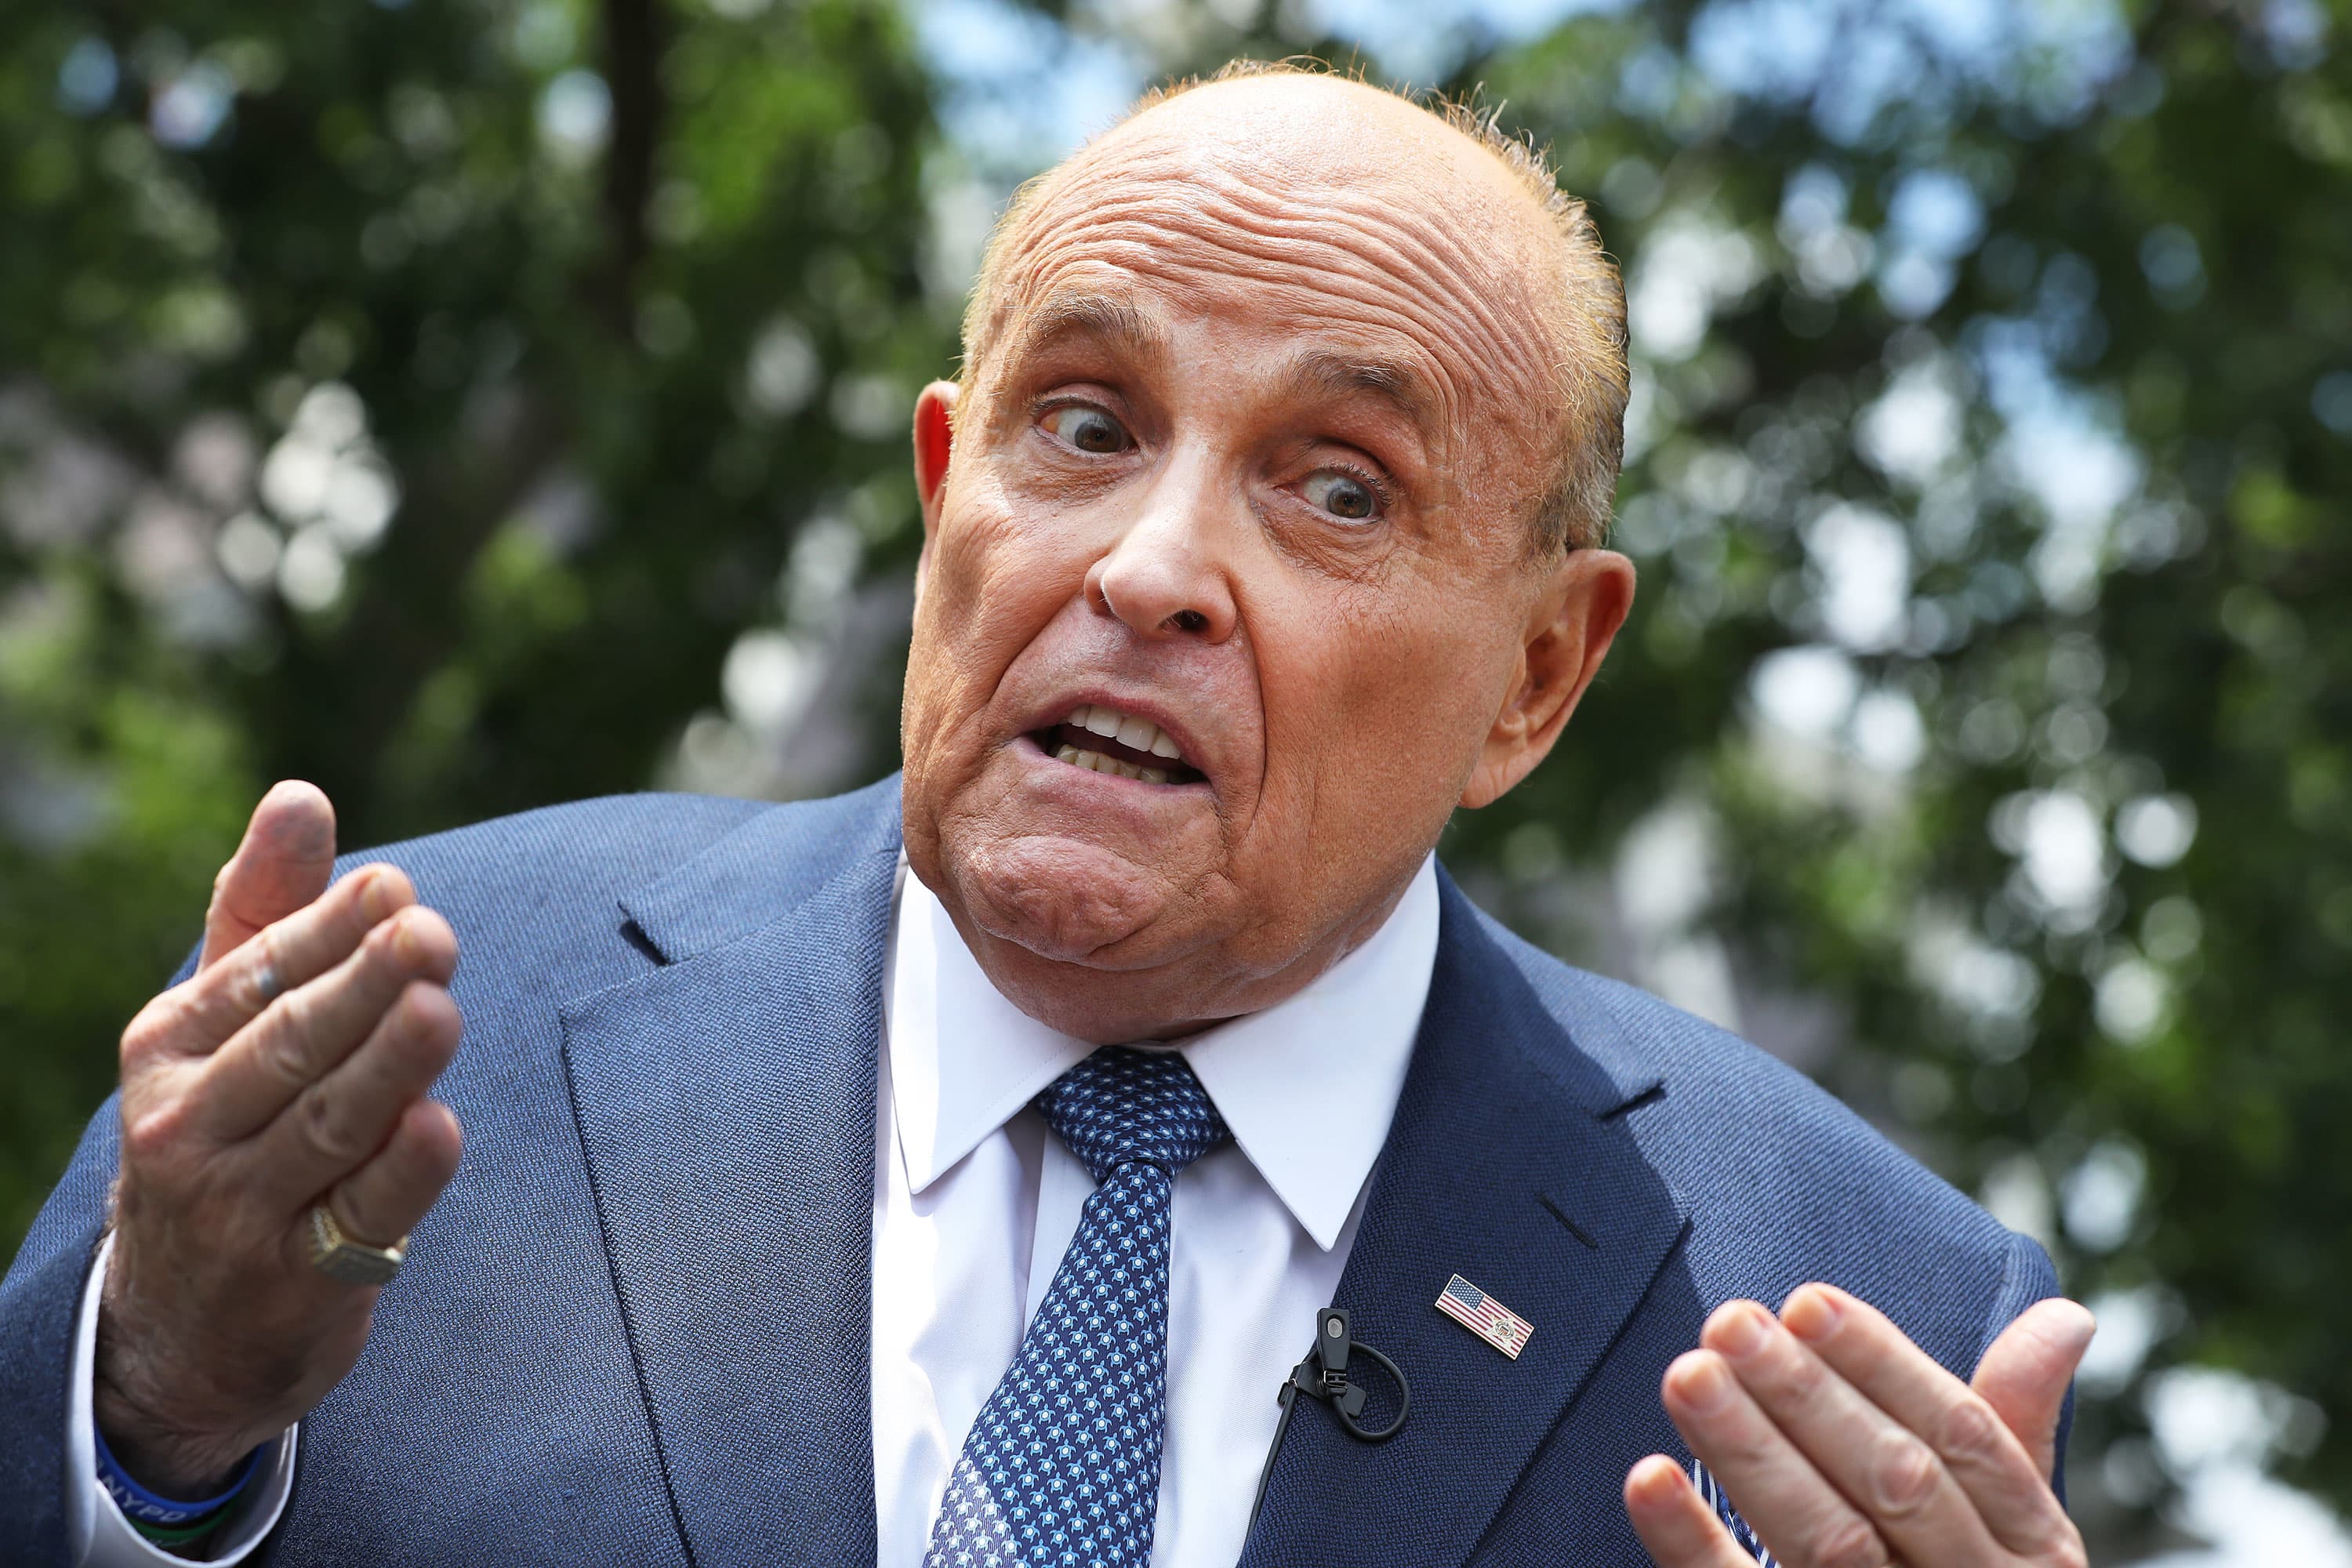 Dominion Voting alerts Trump’s lawyer Rudy Giuliani about litigation